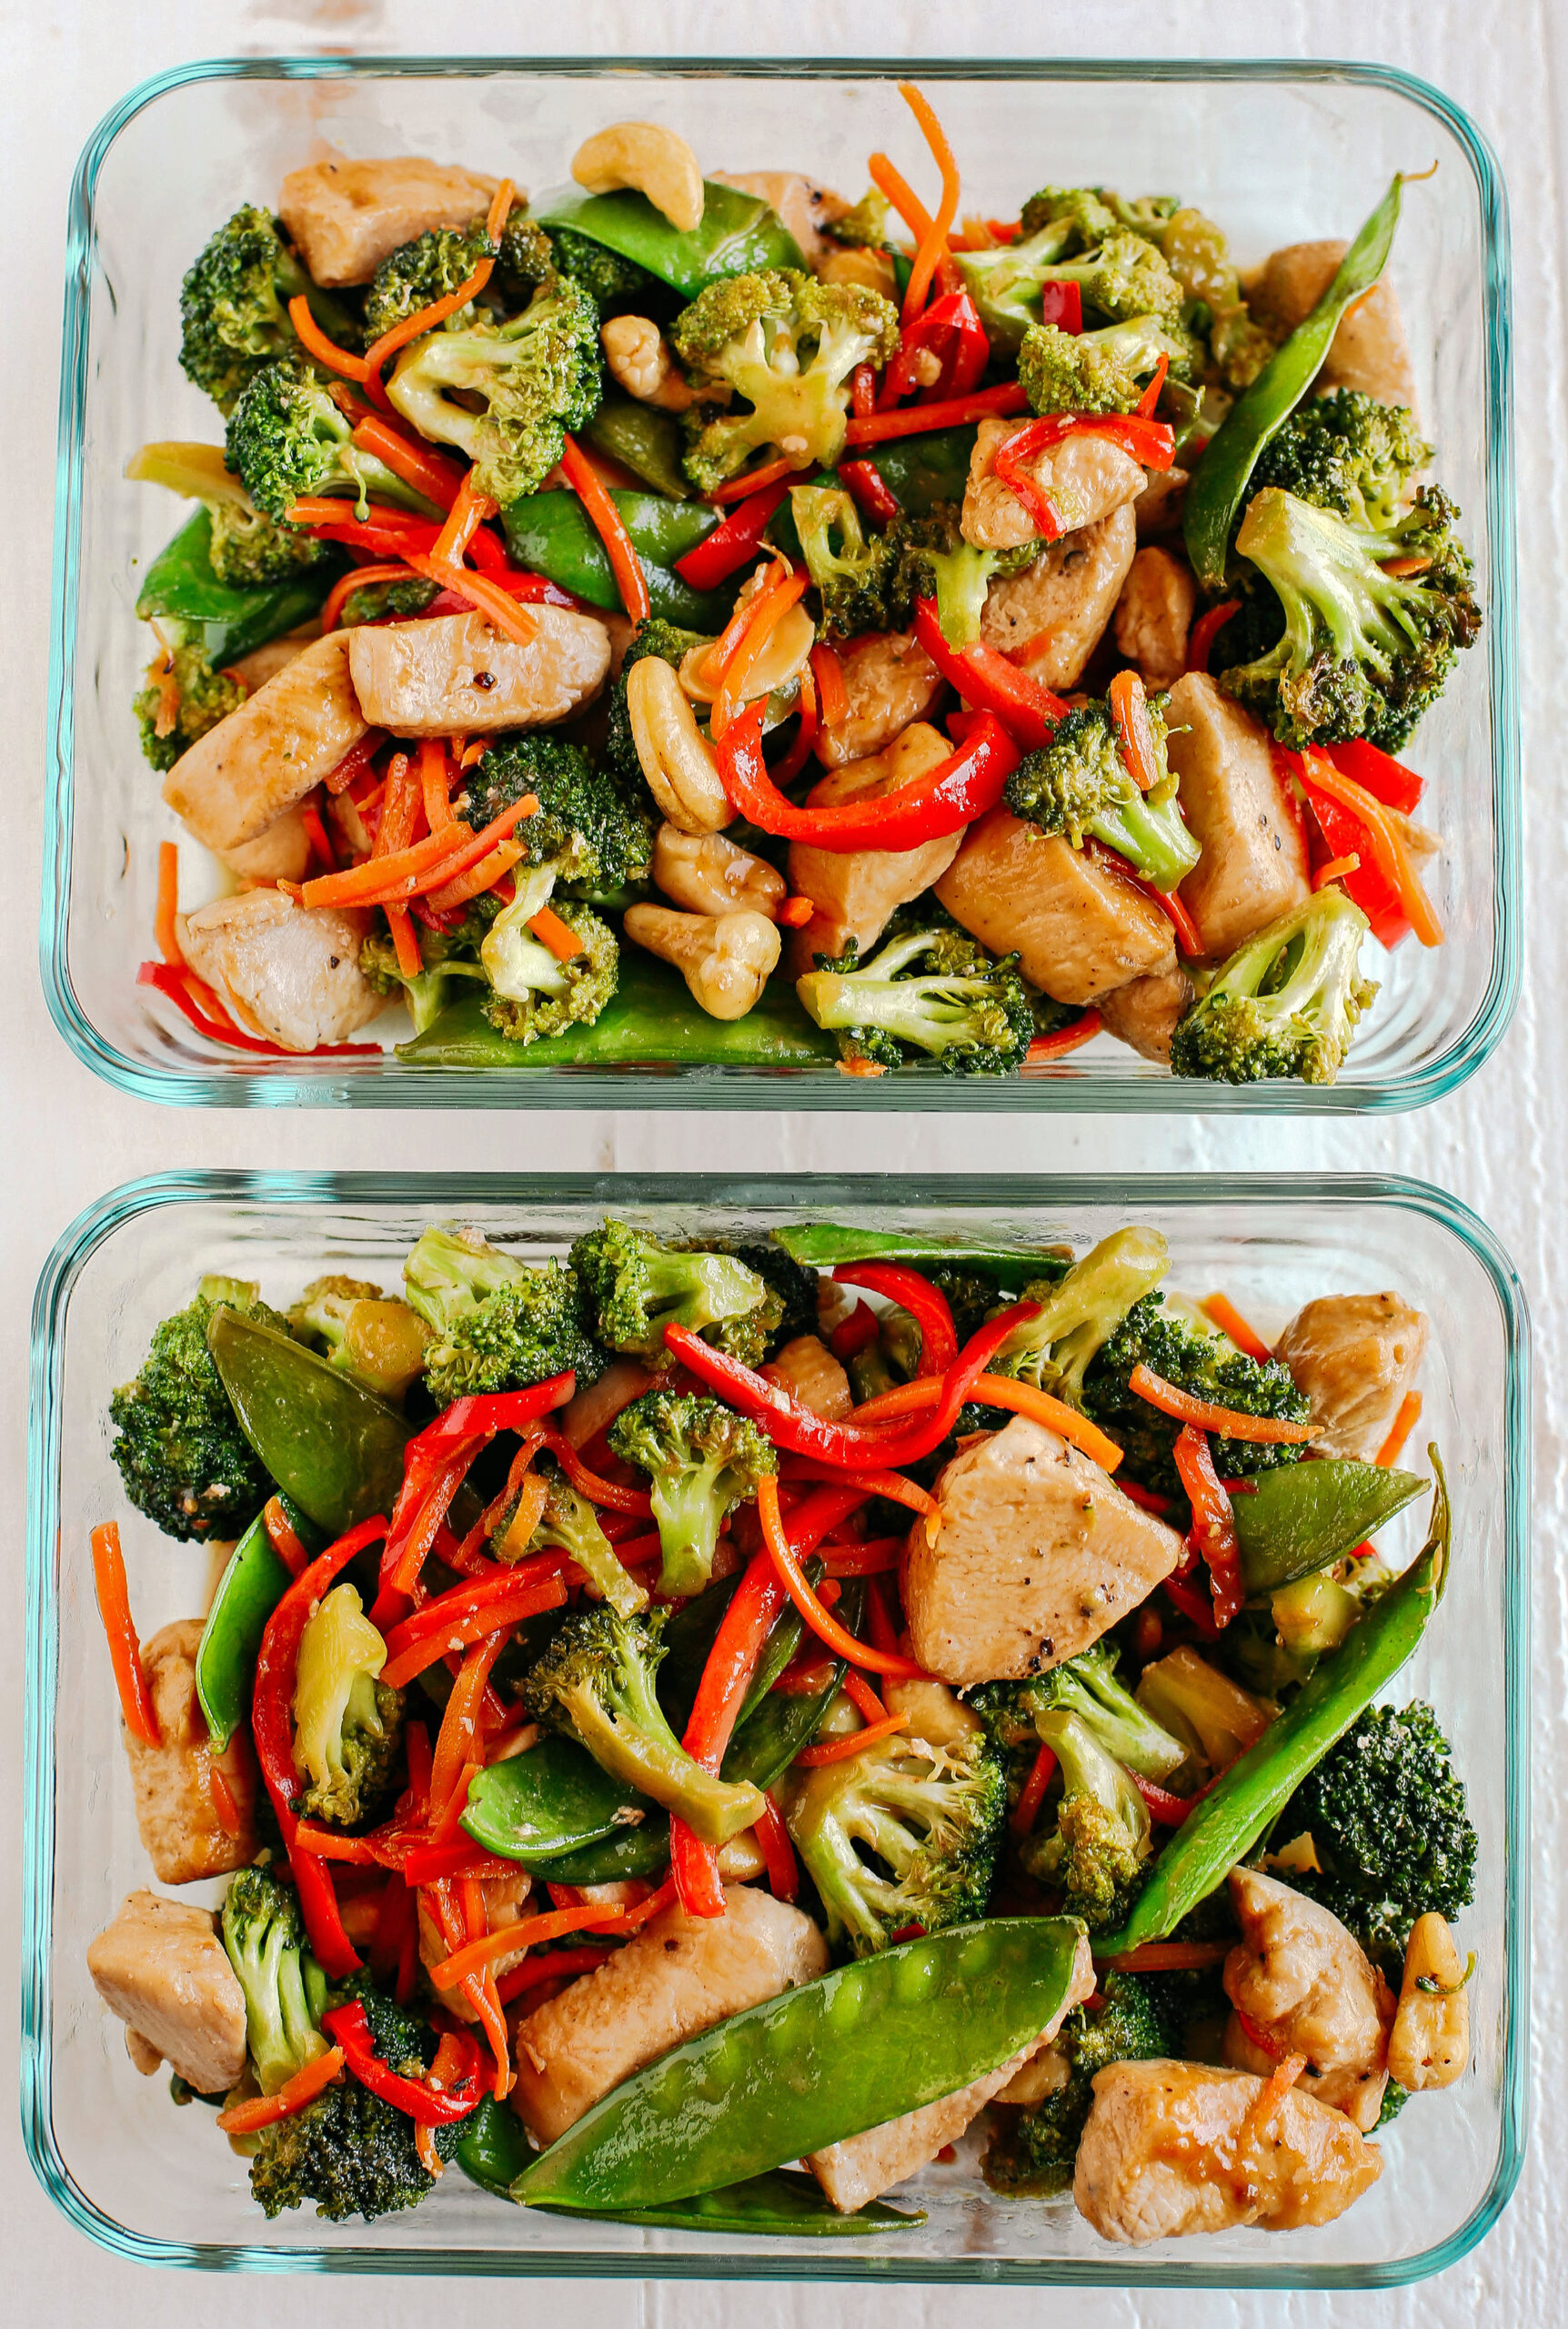 This One Skillet Cashew Chicken Stir Fry is the perfect weeknight meal that is quick and easy to make, full of fresh veggies and tossed together in a delicious homemade peanut sauce!